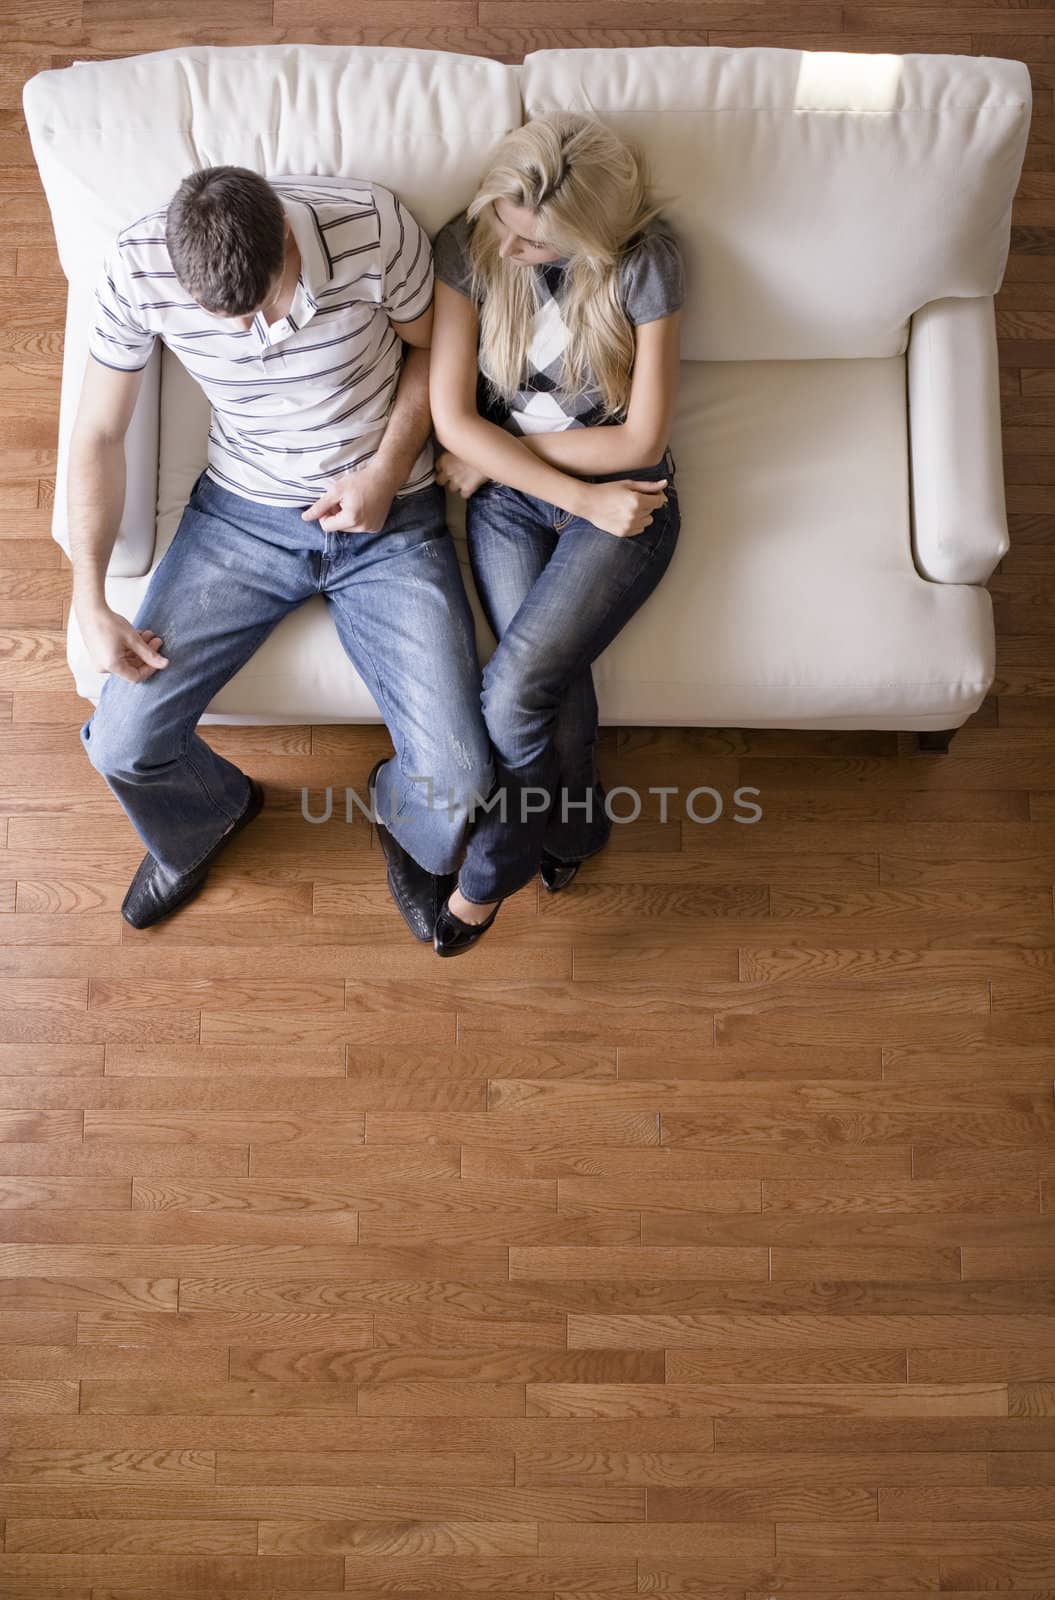 Full length overhead view of couple sitting together on white love seat. Vertical format.